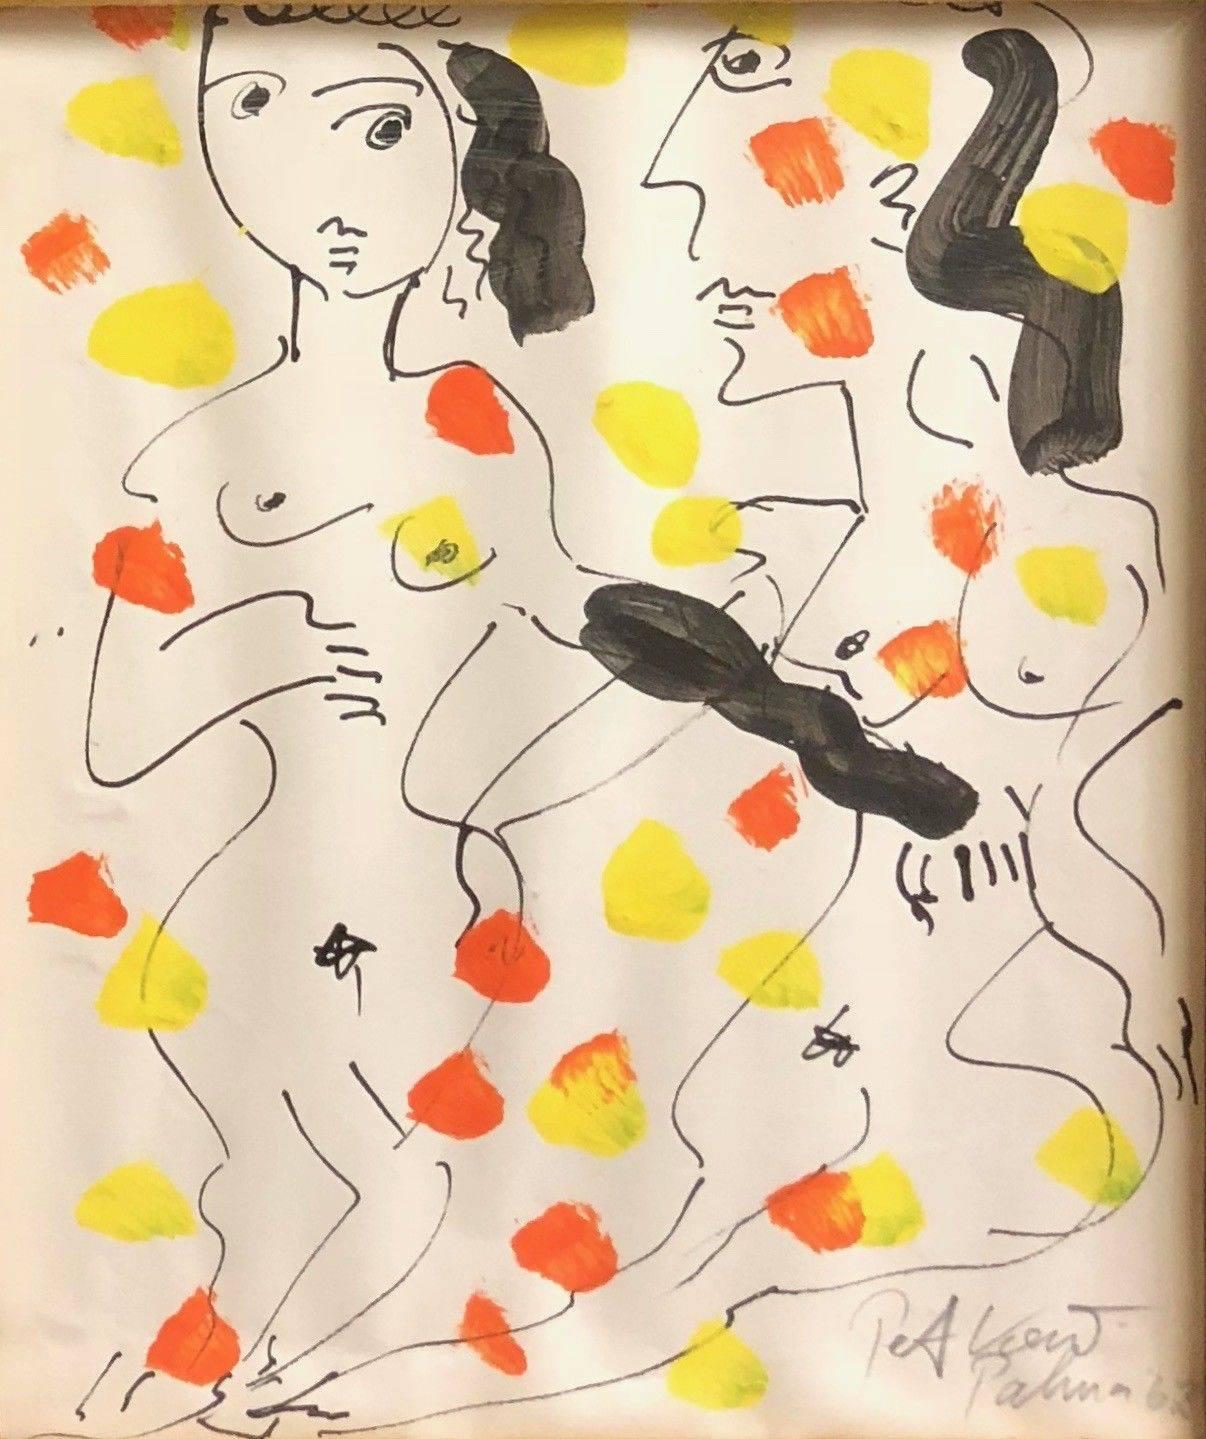 Expressionist framed oil and pencil on paper painting titled 'Two Nudes', painted in 1962 by Peter Robert Keil in Palma. Signed and dated on the front and on the back. The piece is in great vintage condition and has a 